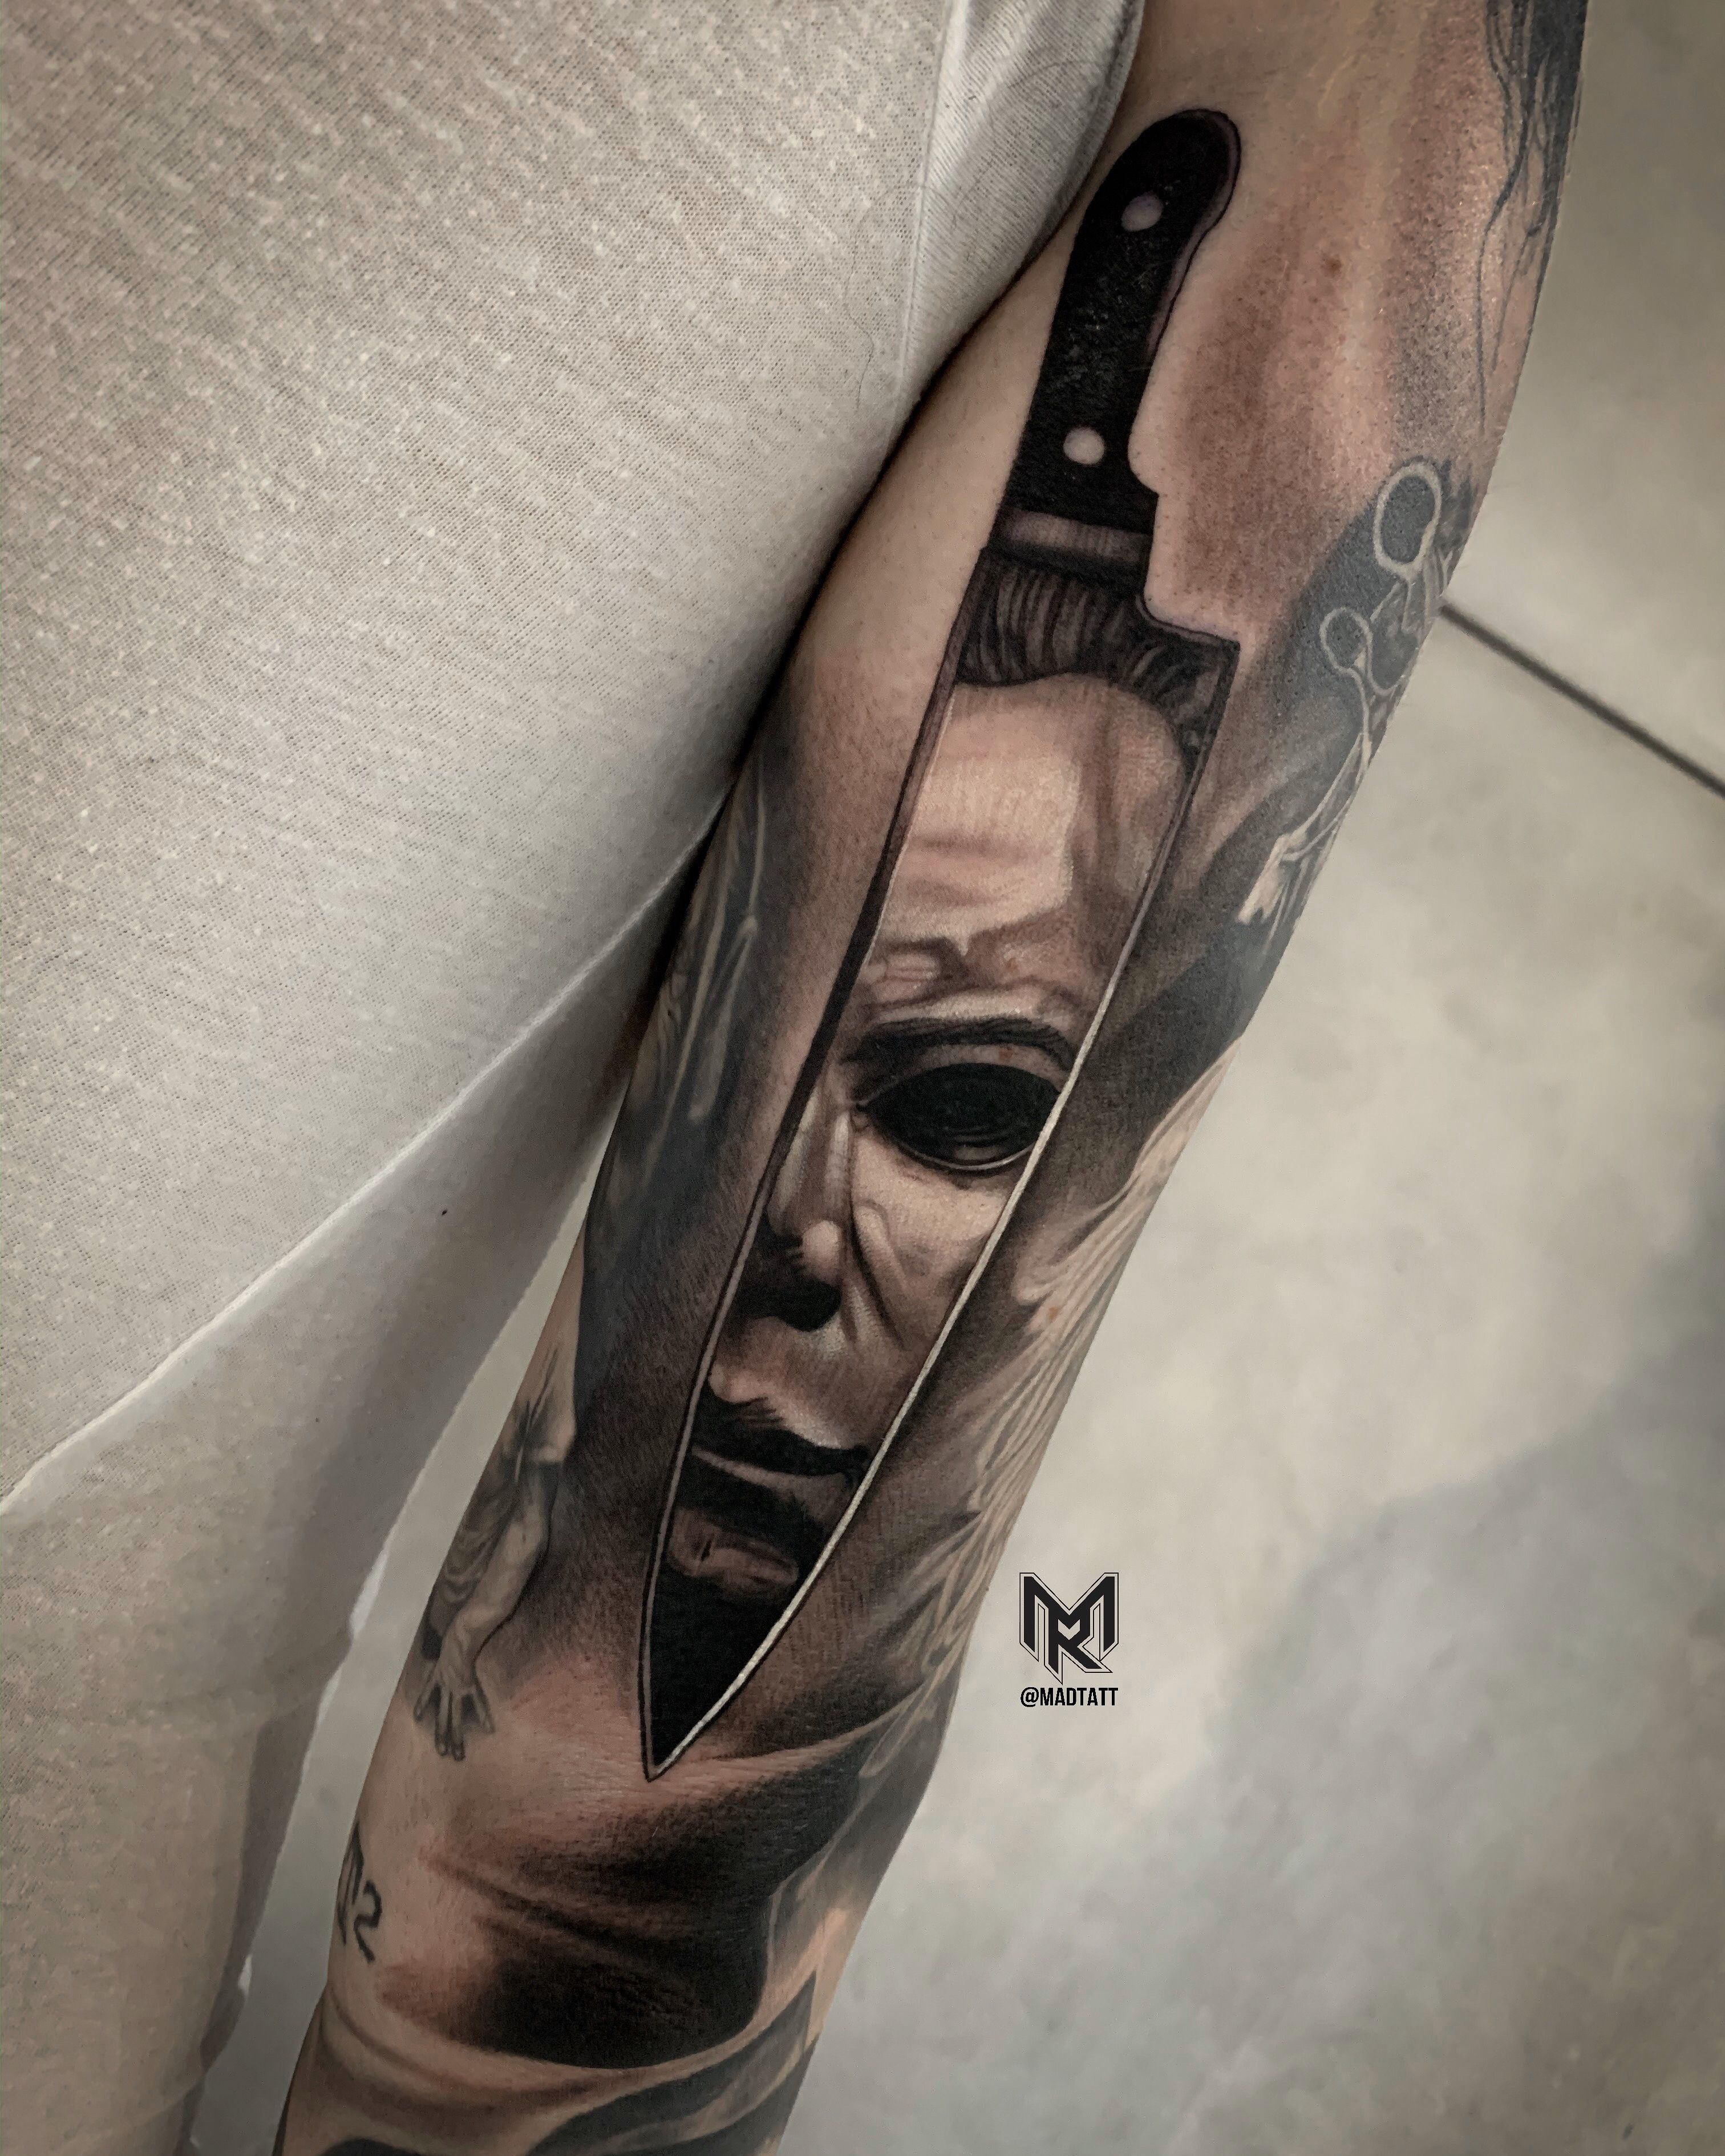 Err Michael Myers  BME Tattoo Piercing and Body Modification NewsBME  Tattoo Piercing and Body Modification News